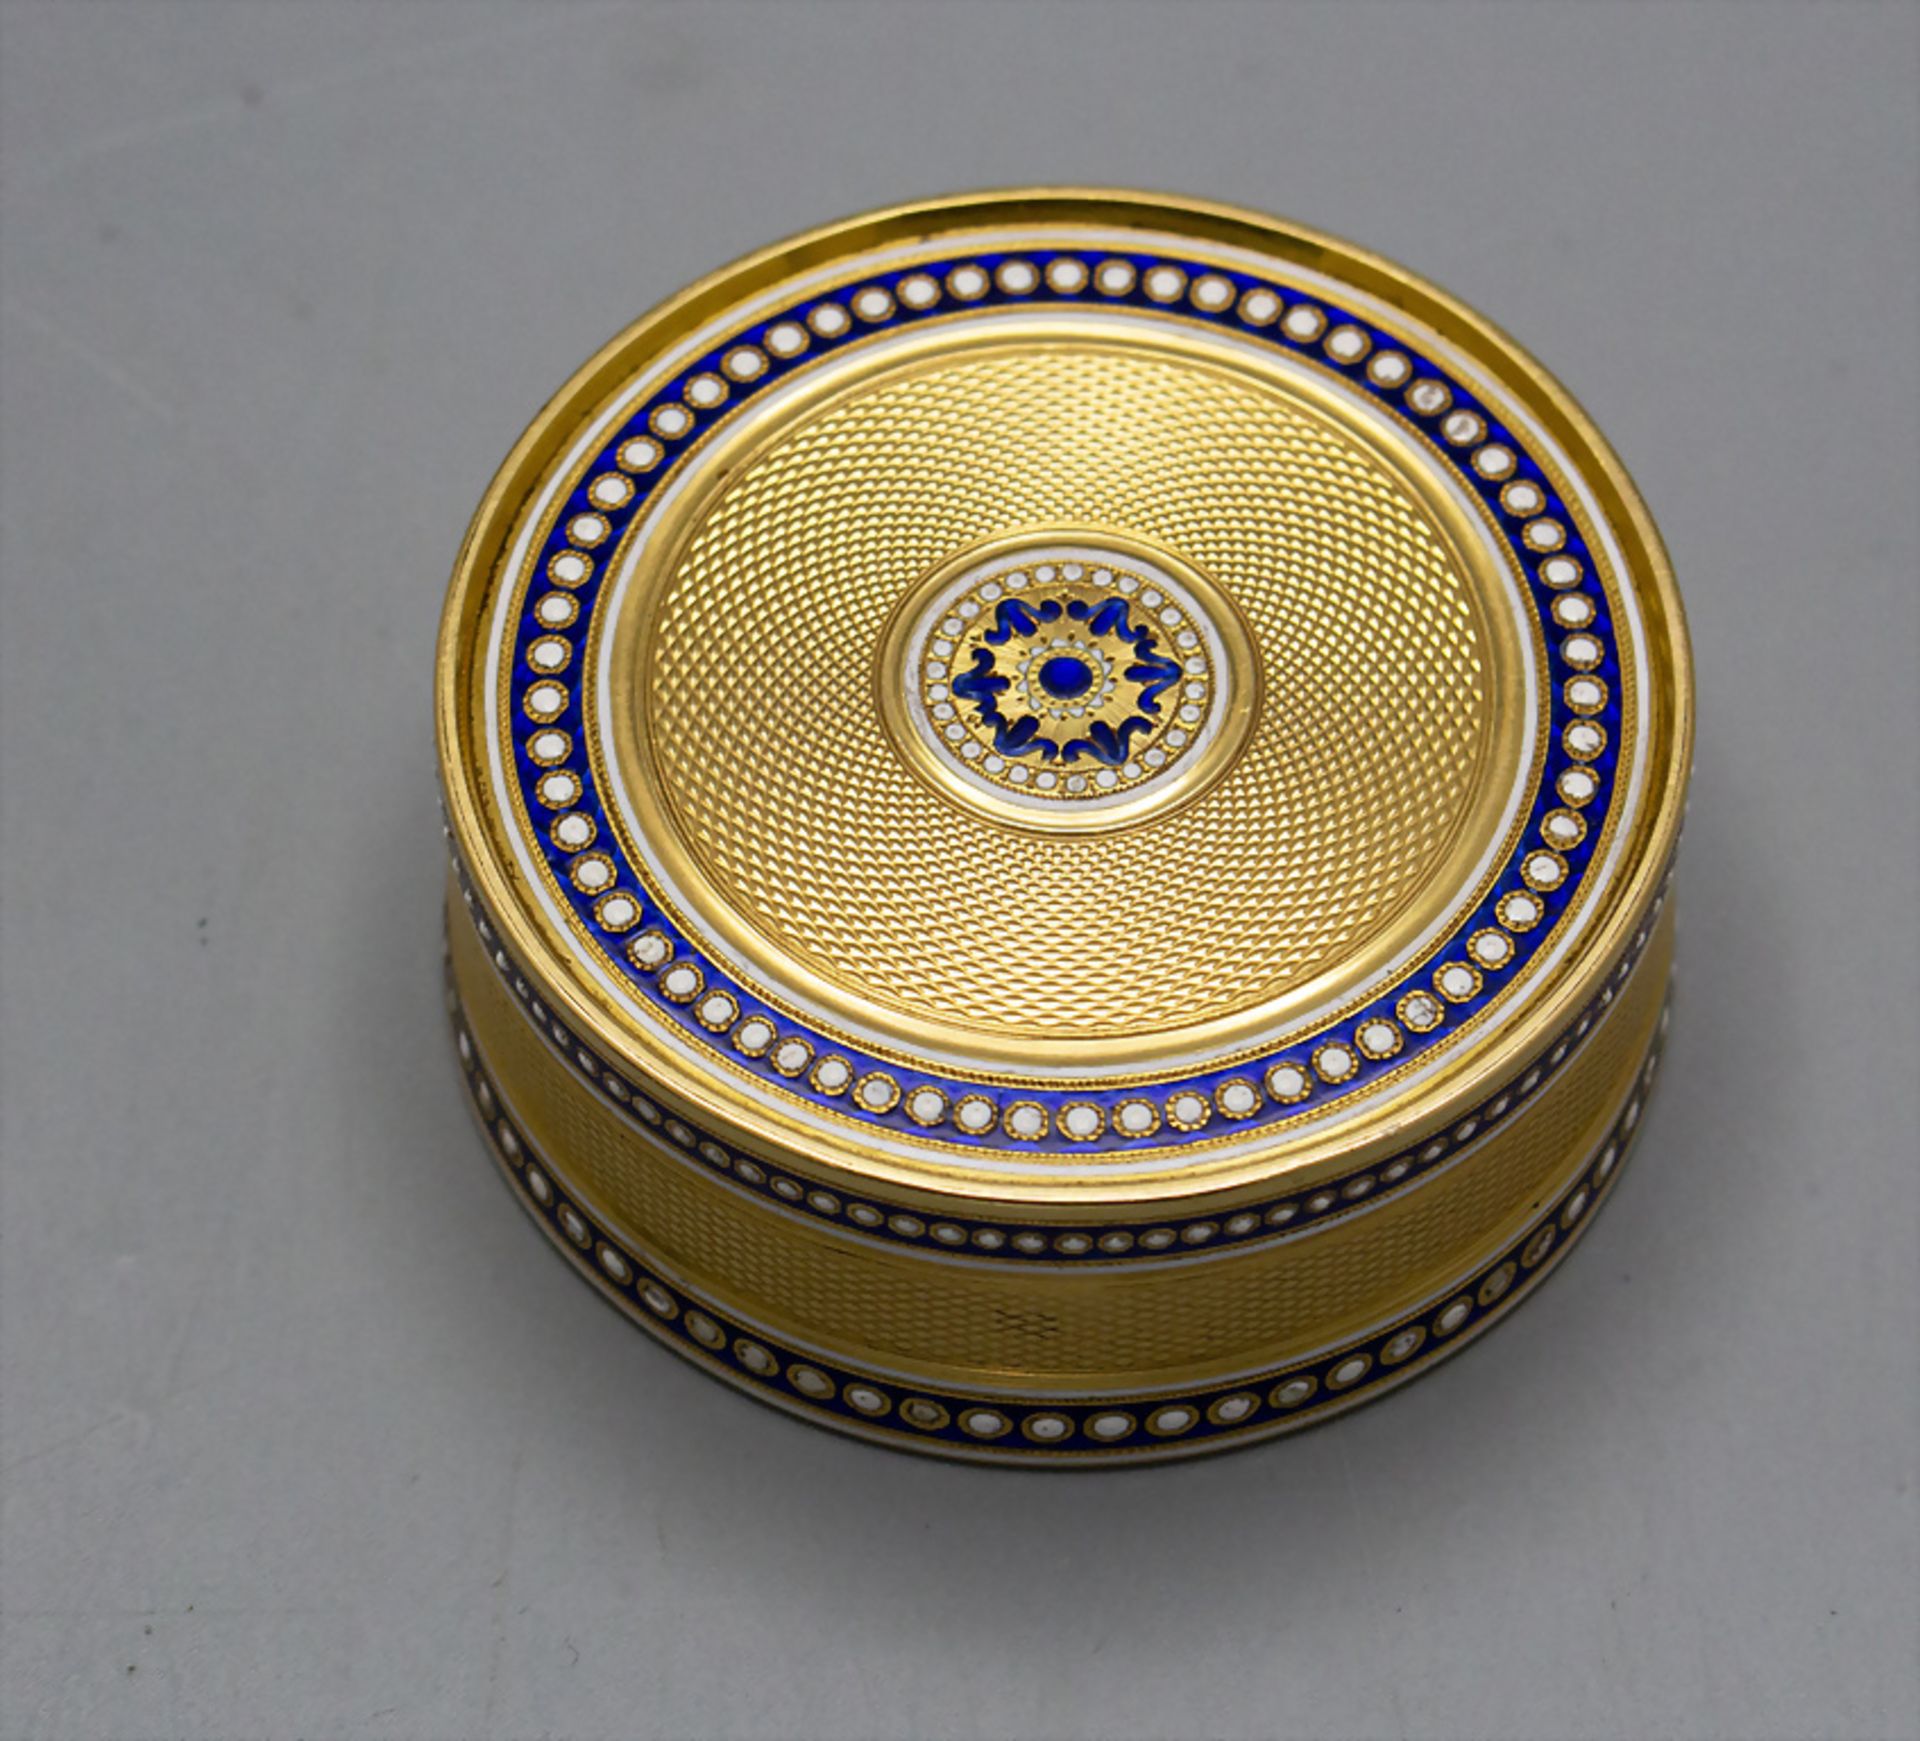 Runde Tabatiere mit Email / Schnupftabakdose / An 18 ct snuff box with enamel, Joseph-Etienne ... - Image 3 of 8